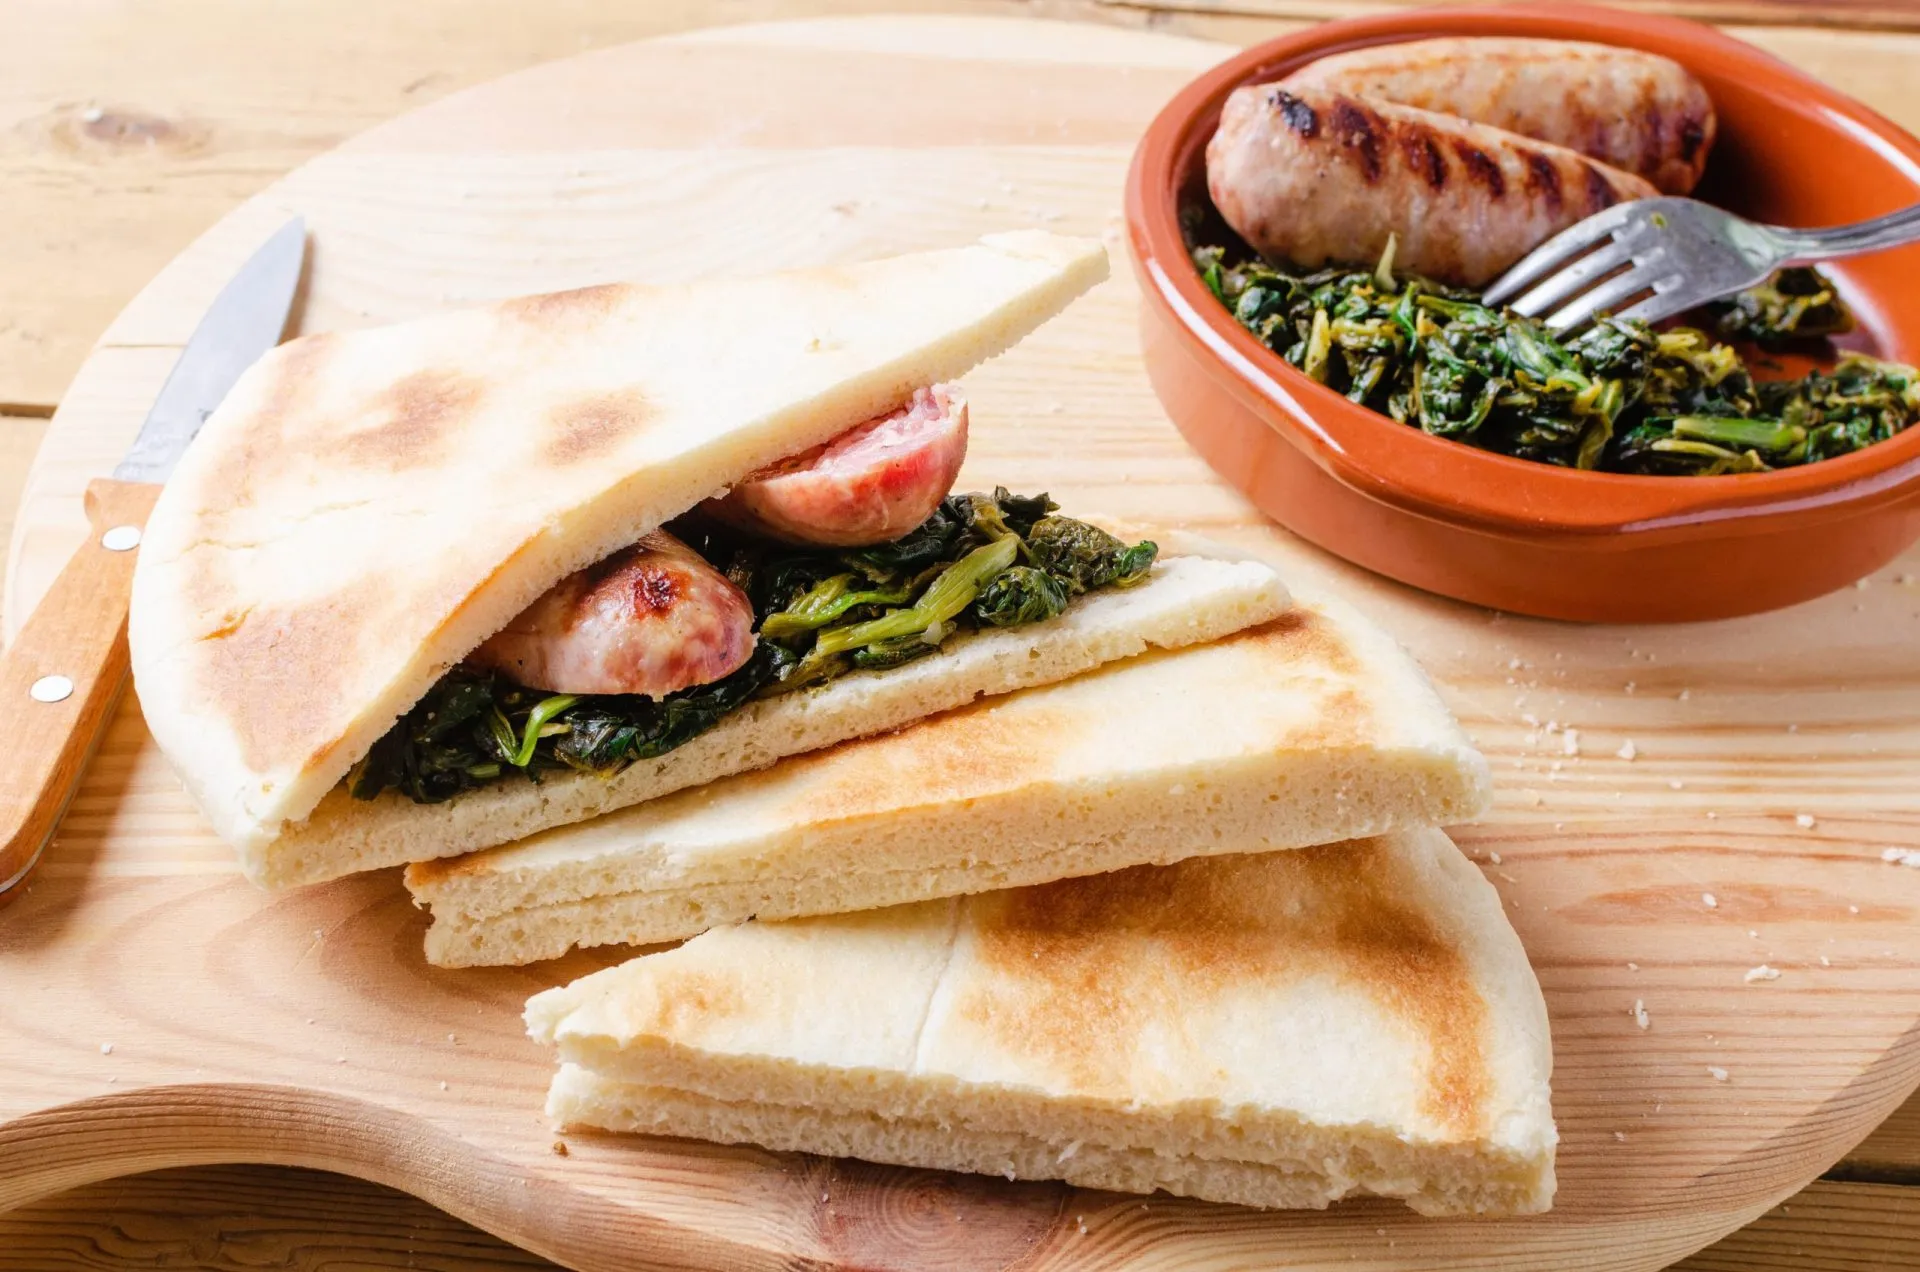 Torta al testo, flatbread with spinach and grilled sausage - traditional umbrian Italy streetfood.